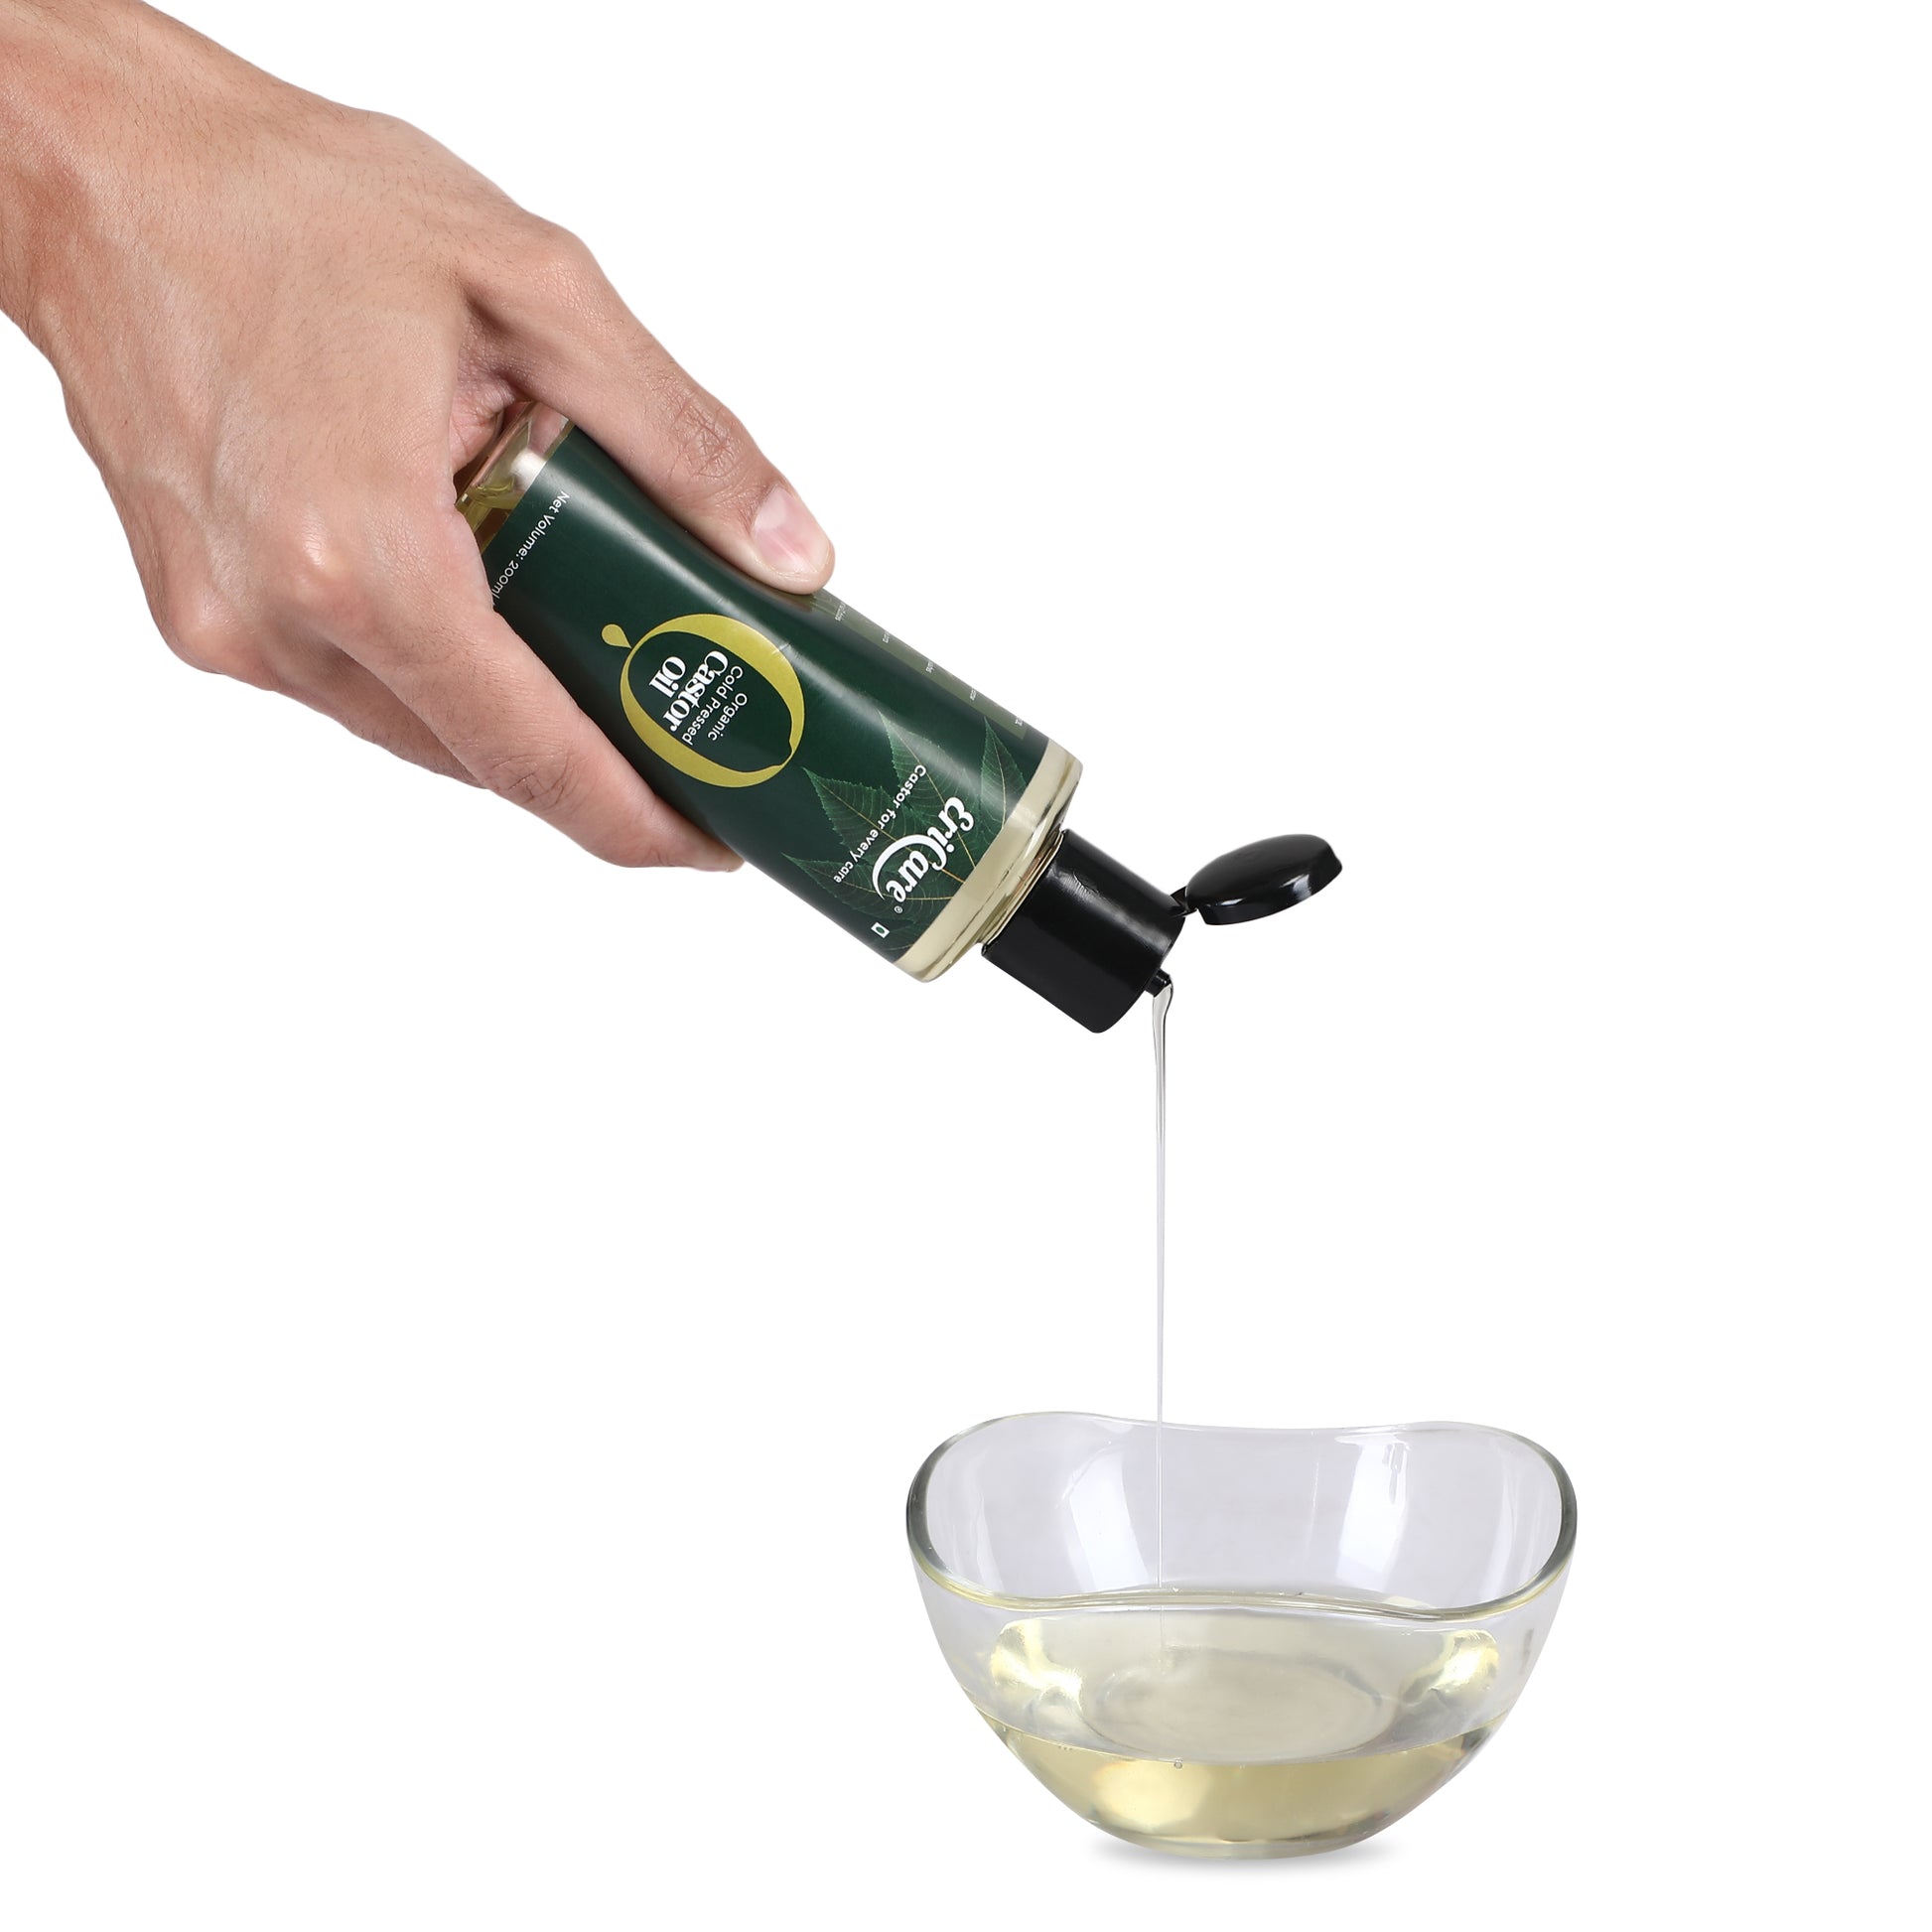 Hand pouring transparent, yellow organic castor oil, demonstrating its high quality and hexane-free nature. The oil emits a mild aroma, showcasing its purity and organic origin.